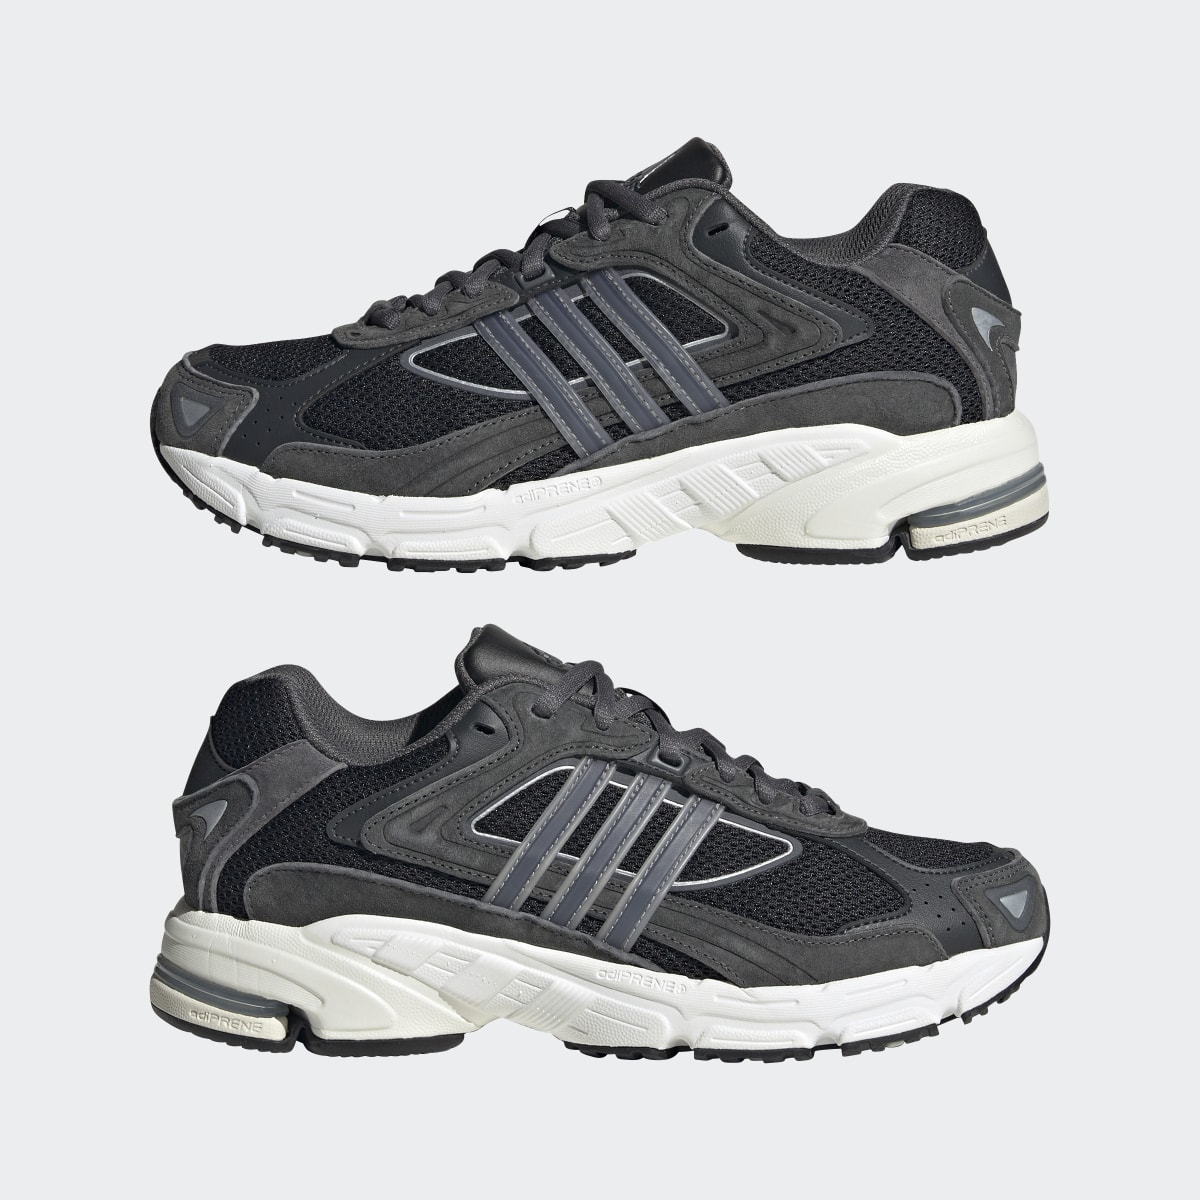 Adidas Chaussure Response CL. 8